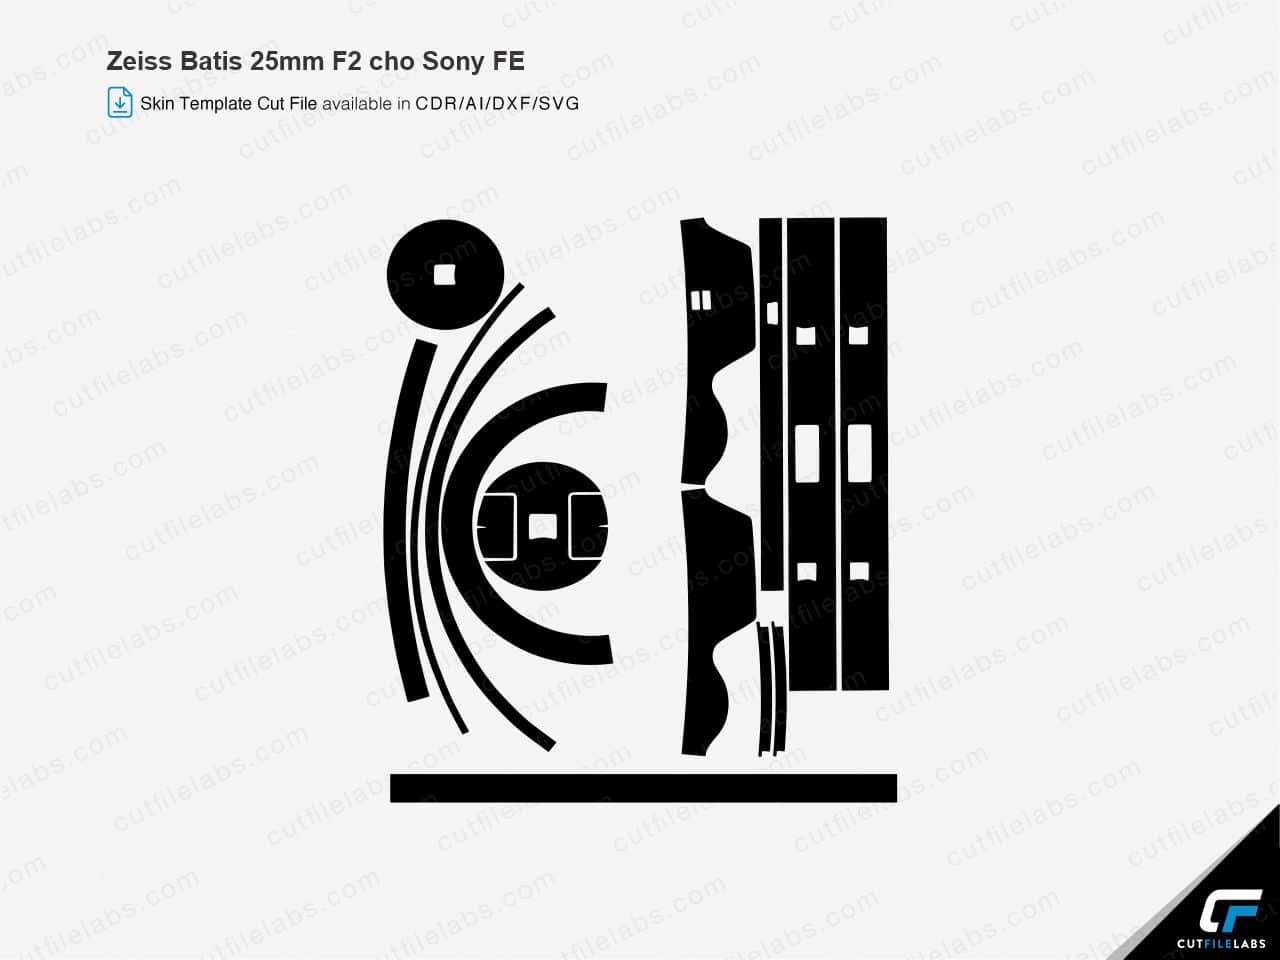 Zeiss Batis 25mm F2 for Sony FE (2015) Cut File Template